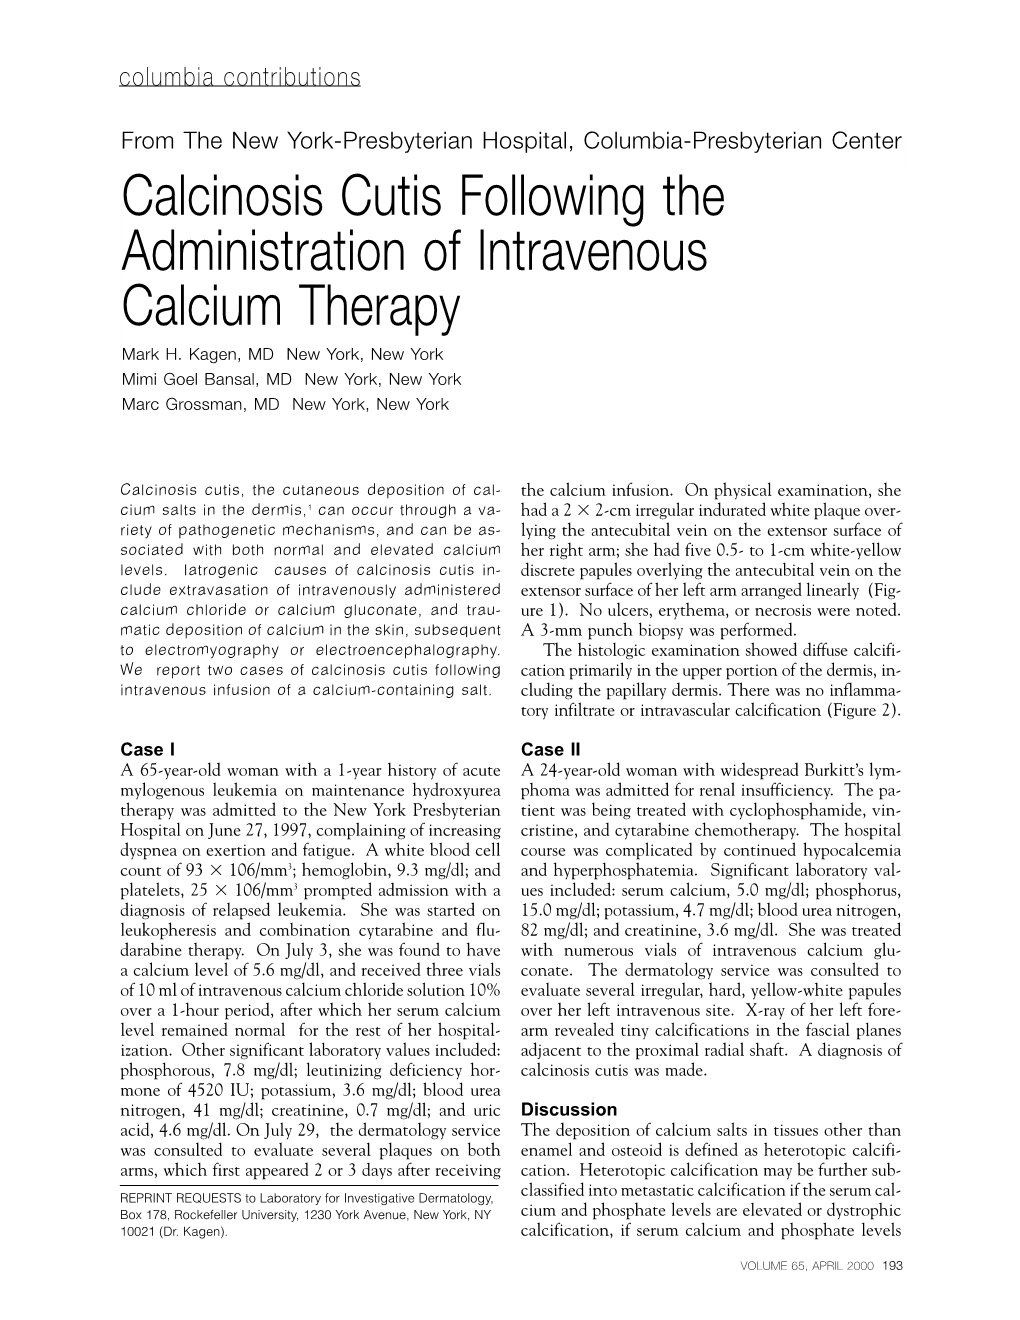 Calcinosis Cutis Following the Administration of Intravenous Calcium Therapy Mark H